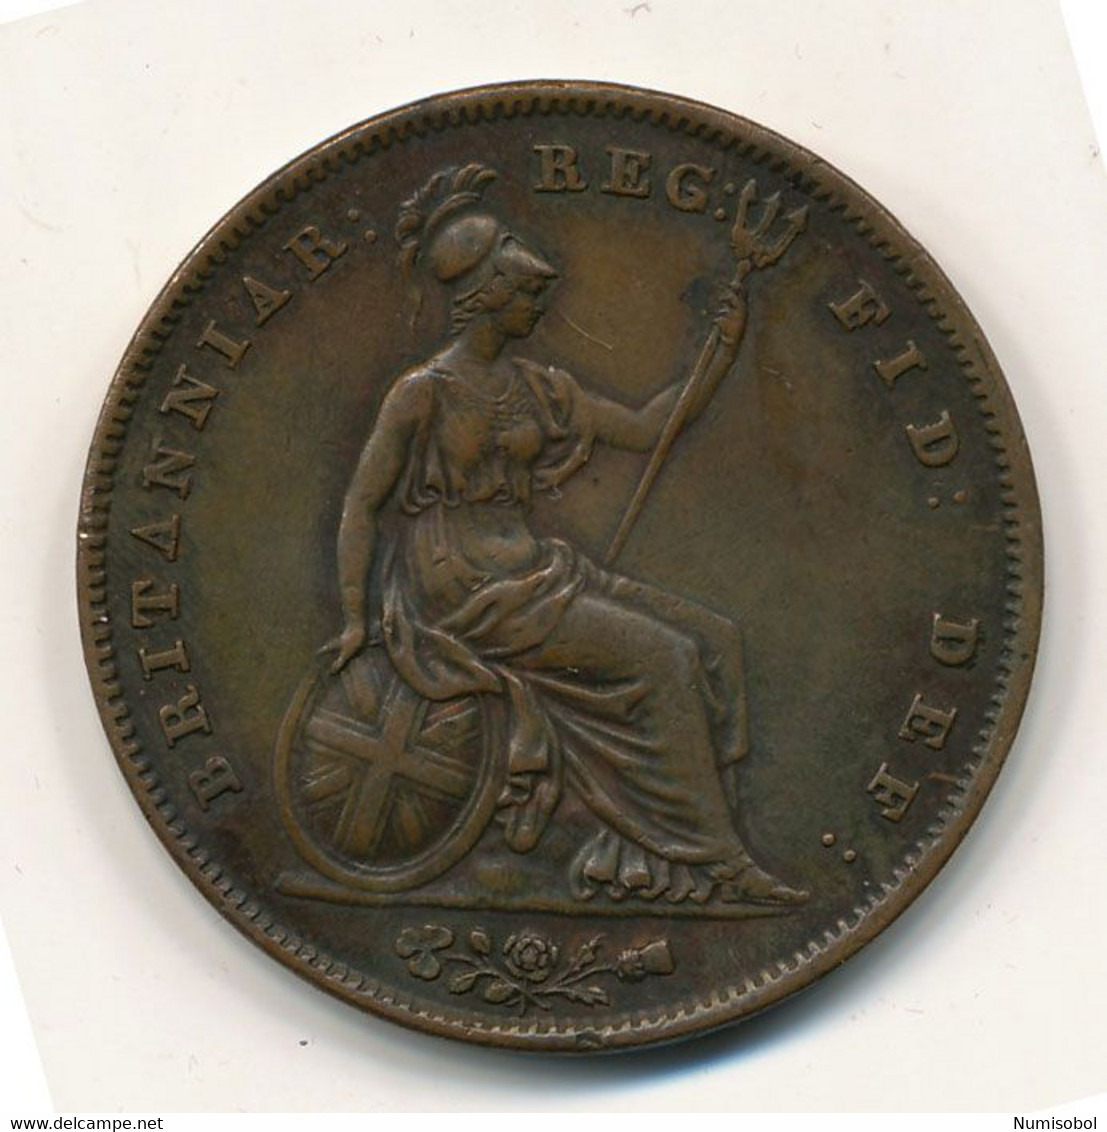 GREAT BRITAIN - 1 Penny 1844. (Victoria) High Quality. (GB021) - D. 1 Penny